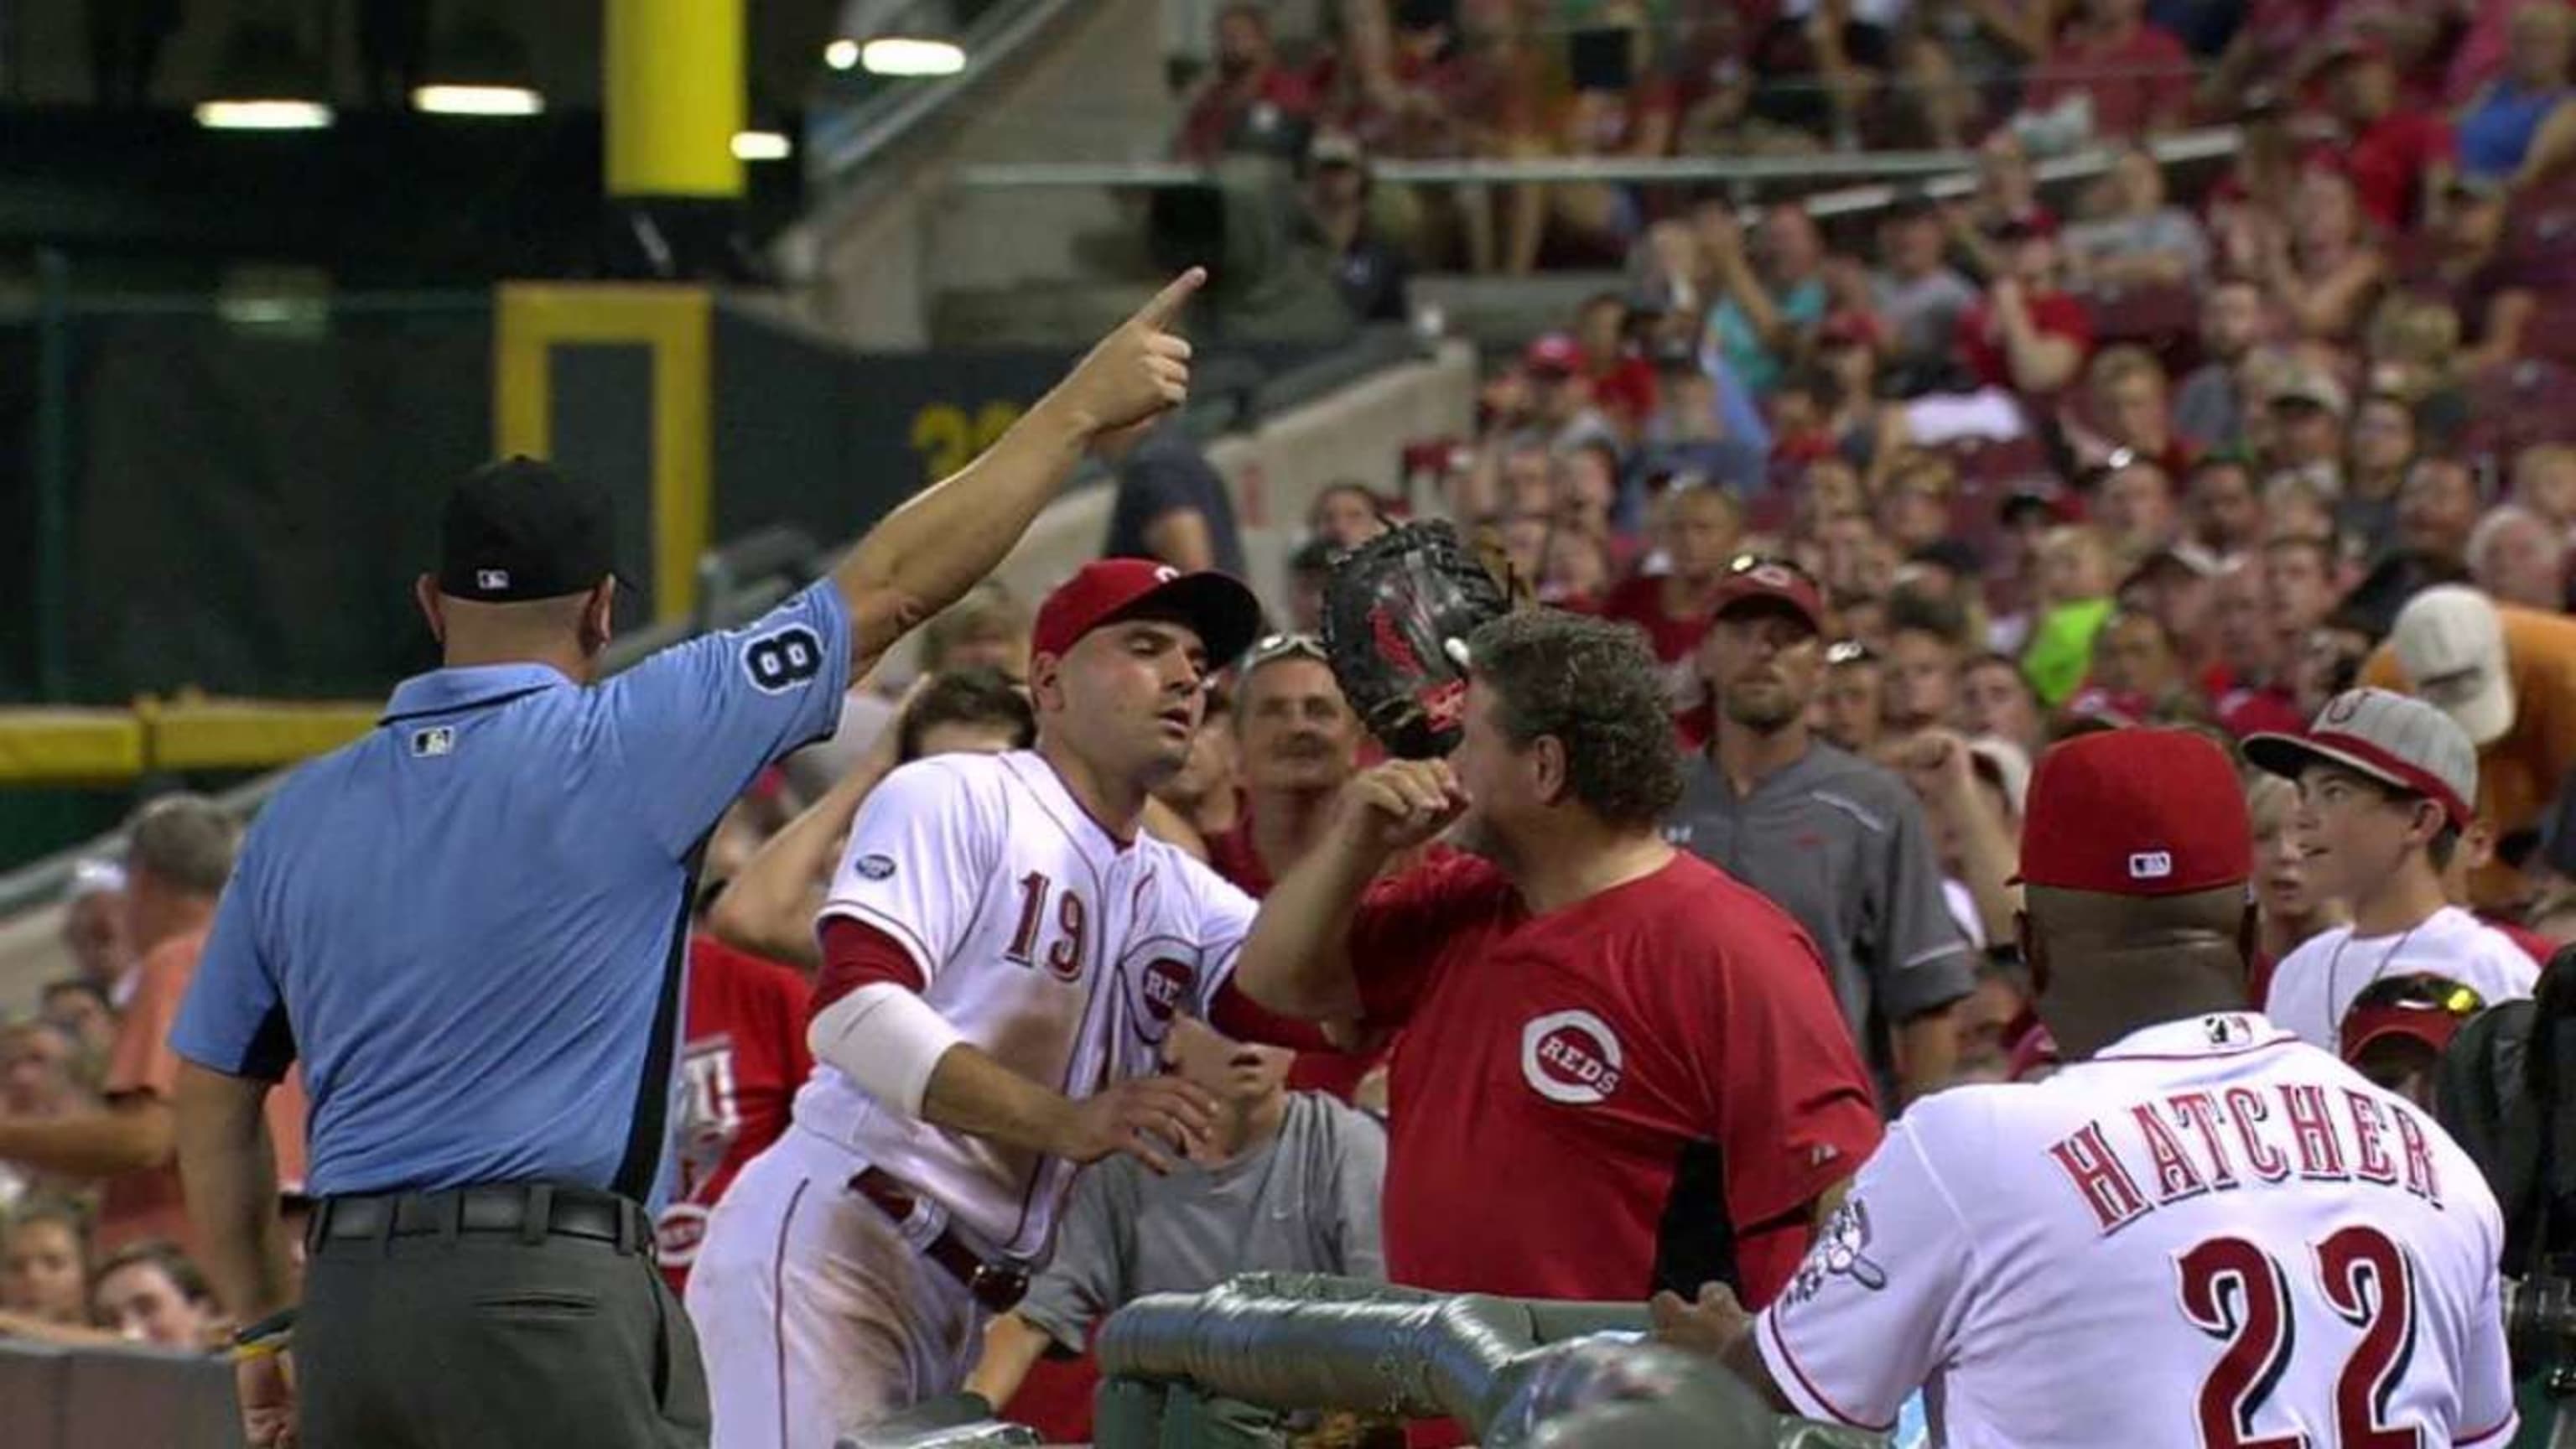 Joey Votto messed with some fans after dropping a foul ball